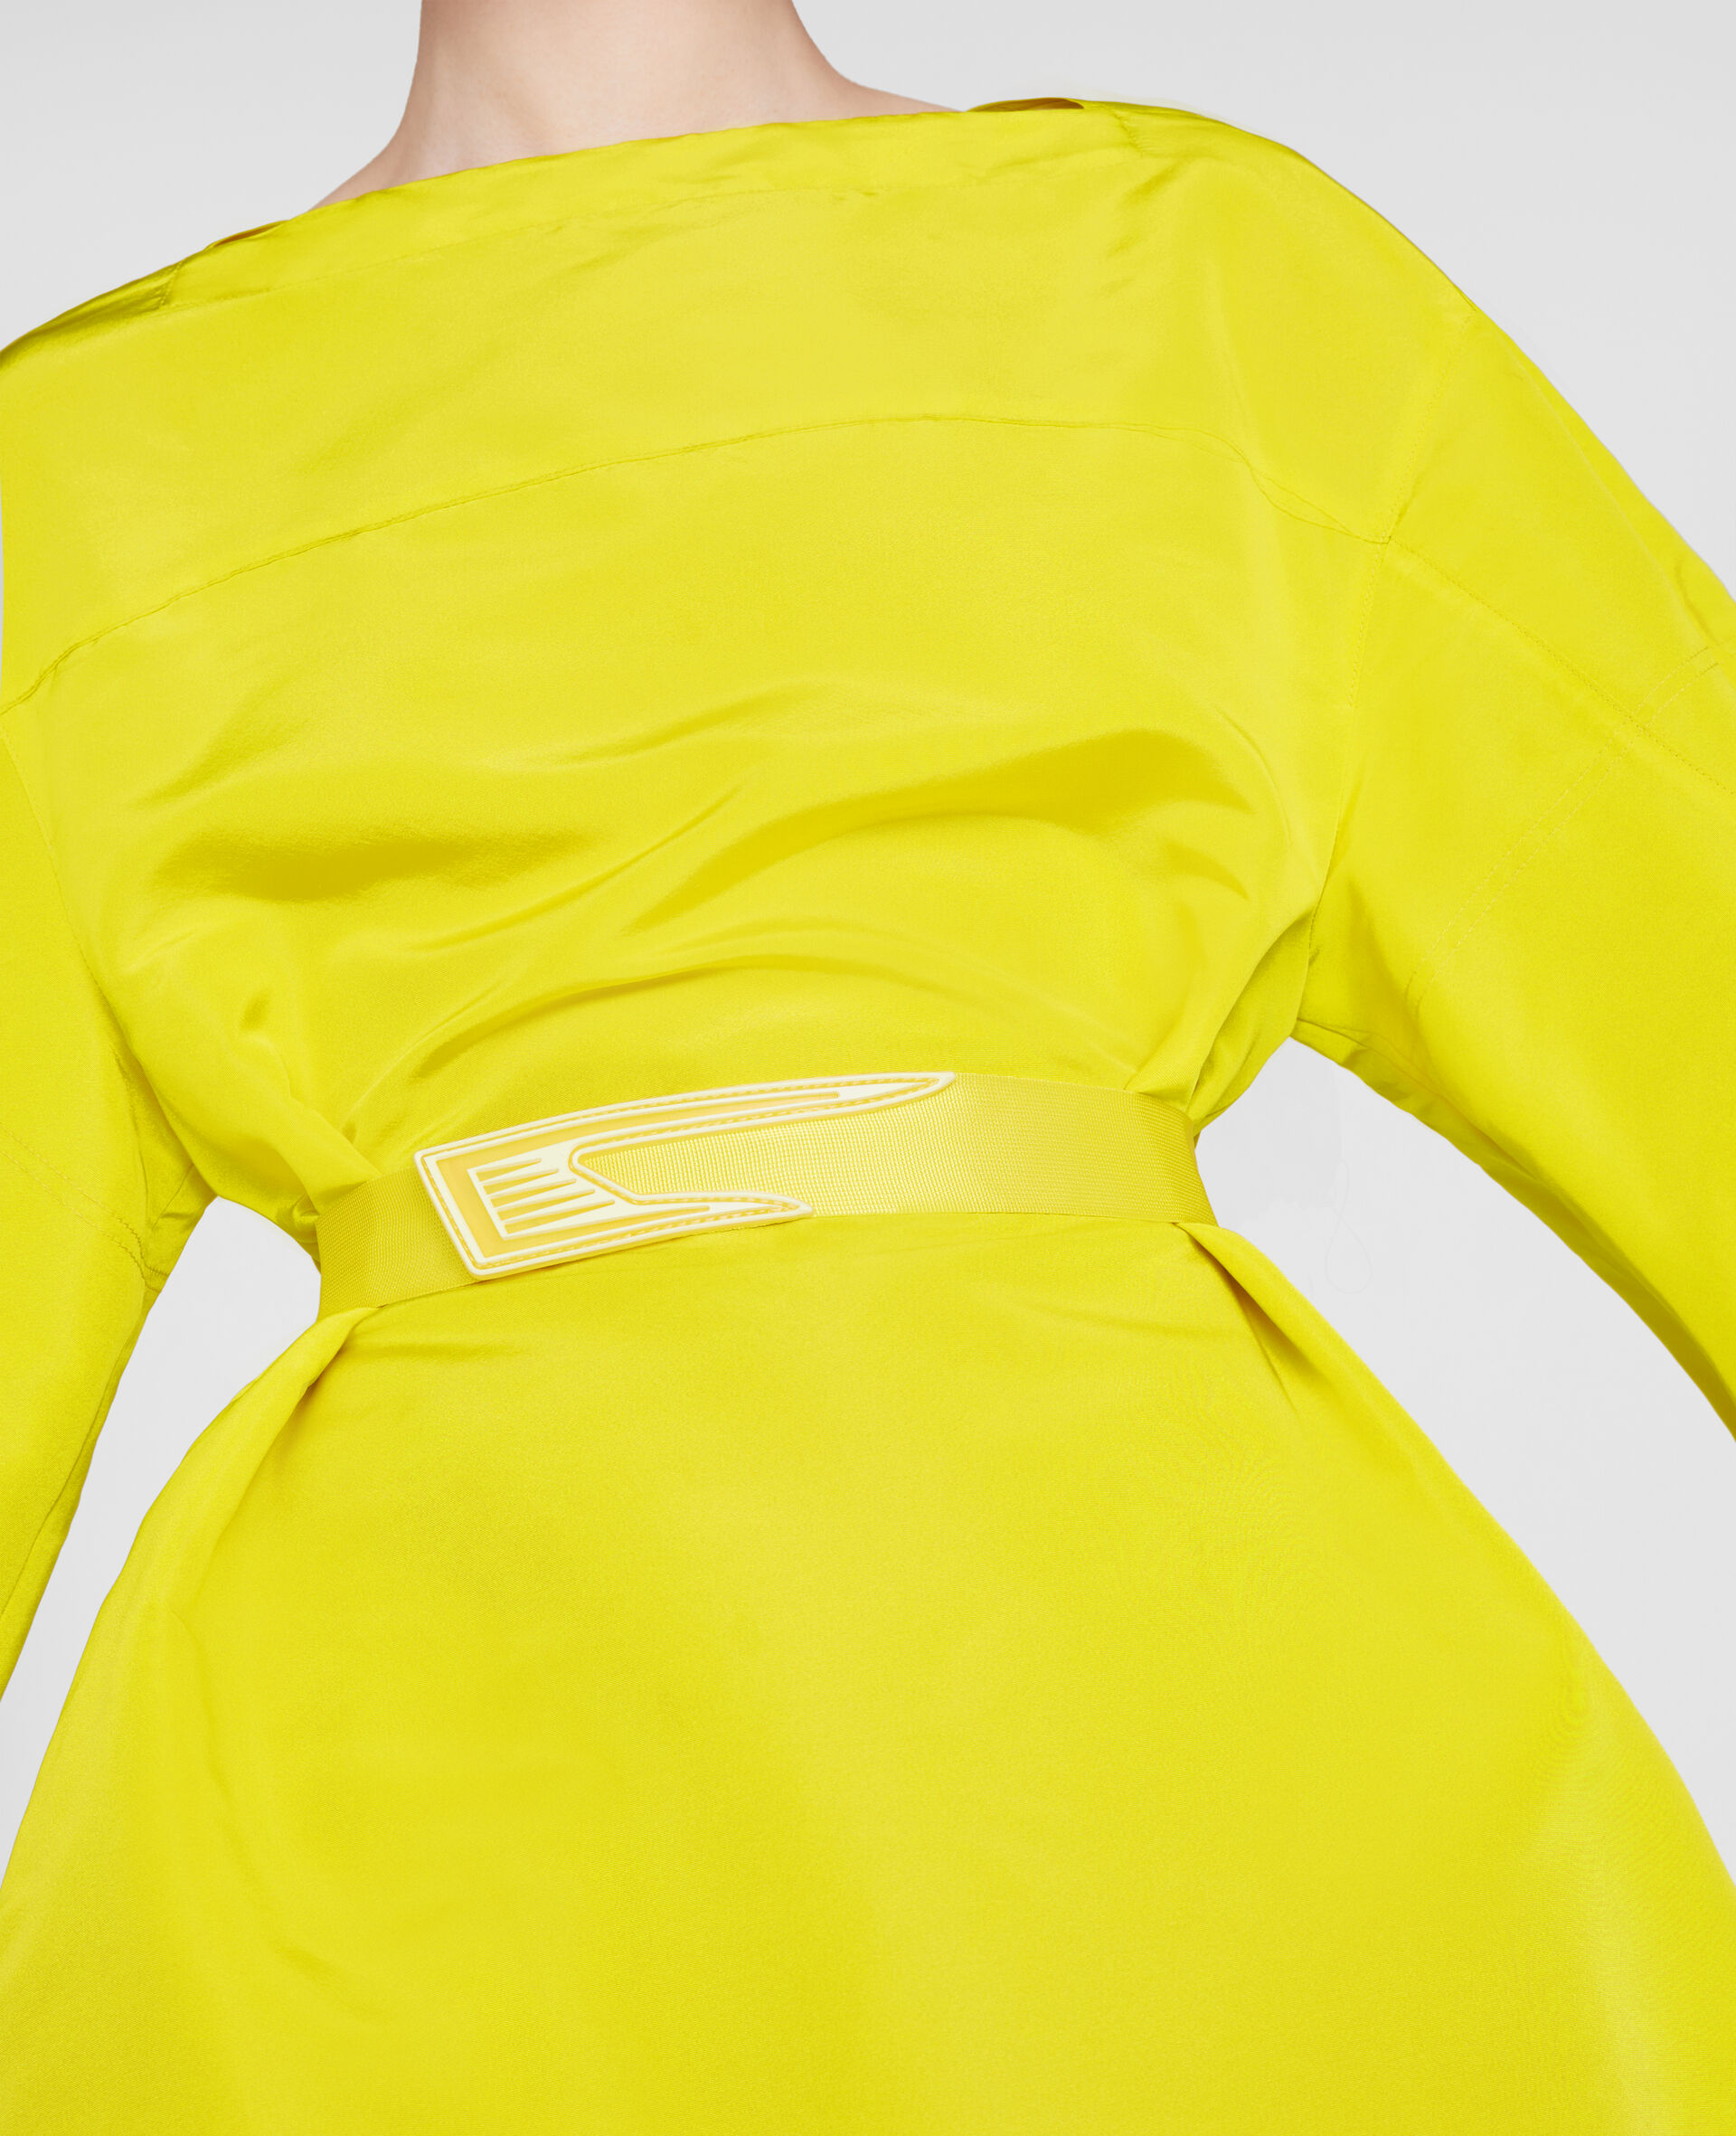 Belted Mini Dress-Yellow-large image number 3